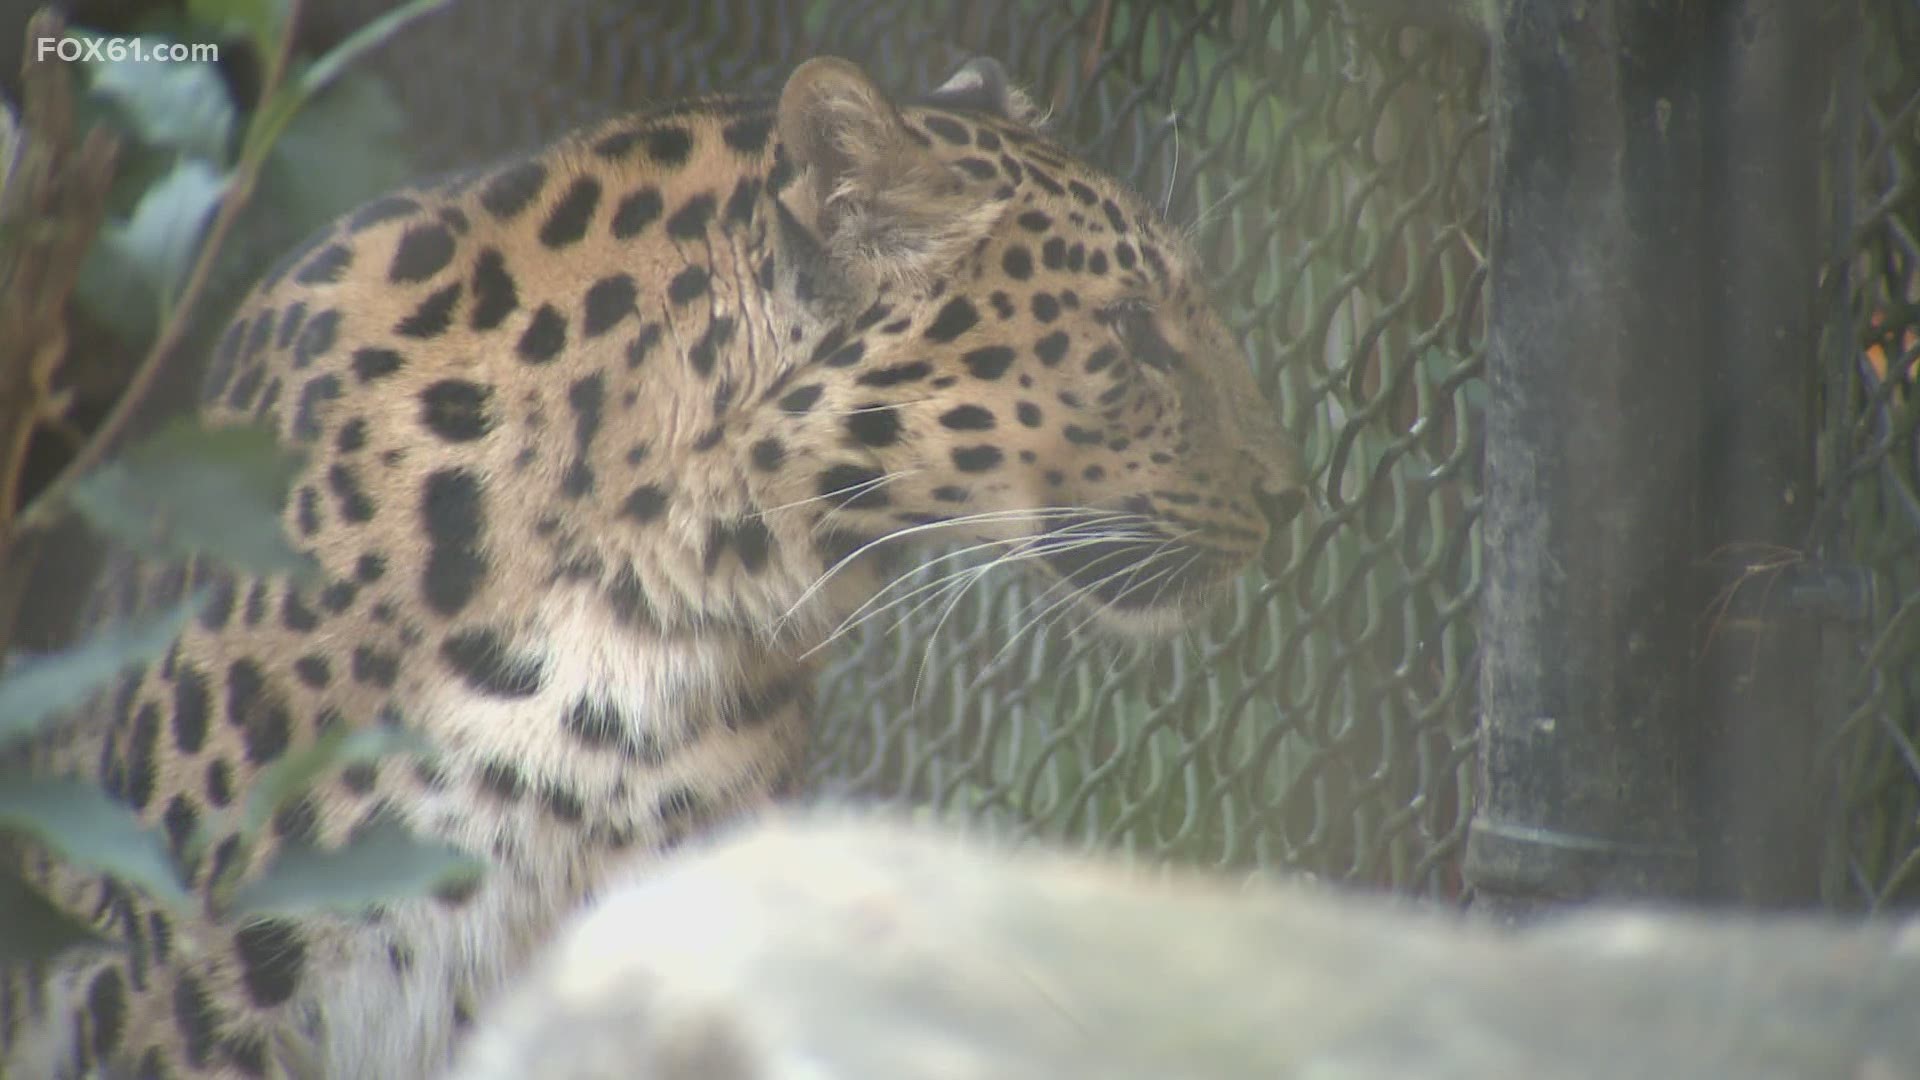 FOX61's Keith McGilverly visits the Bridgeport zoo and lists his top 5 things to do!